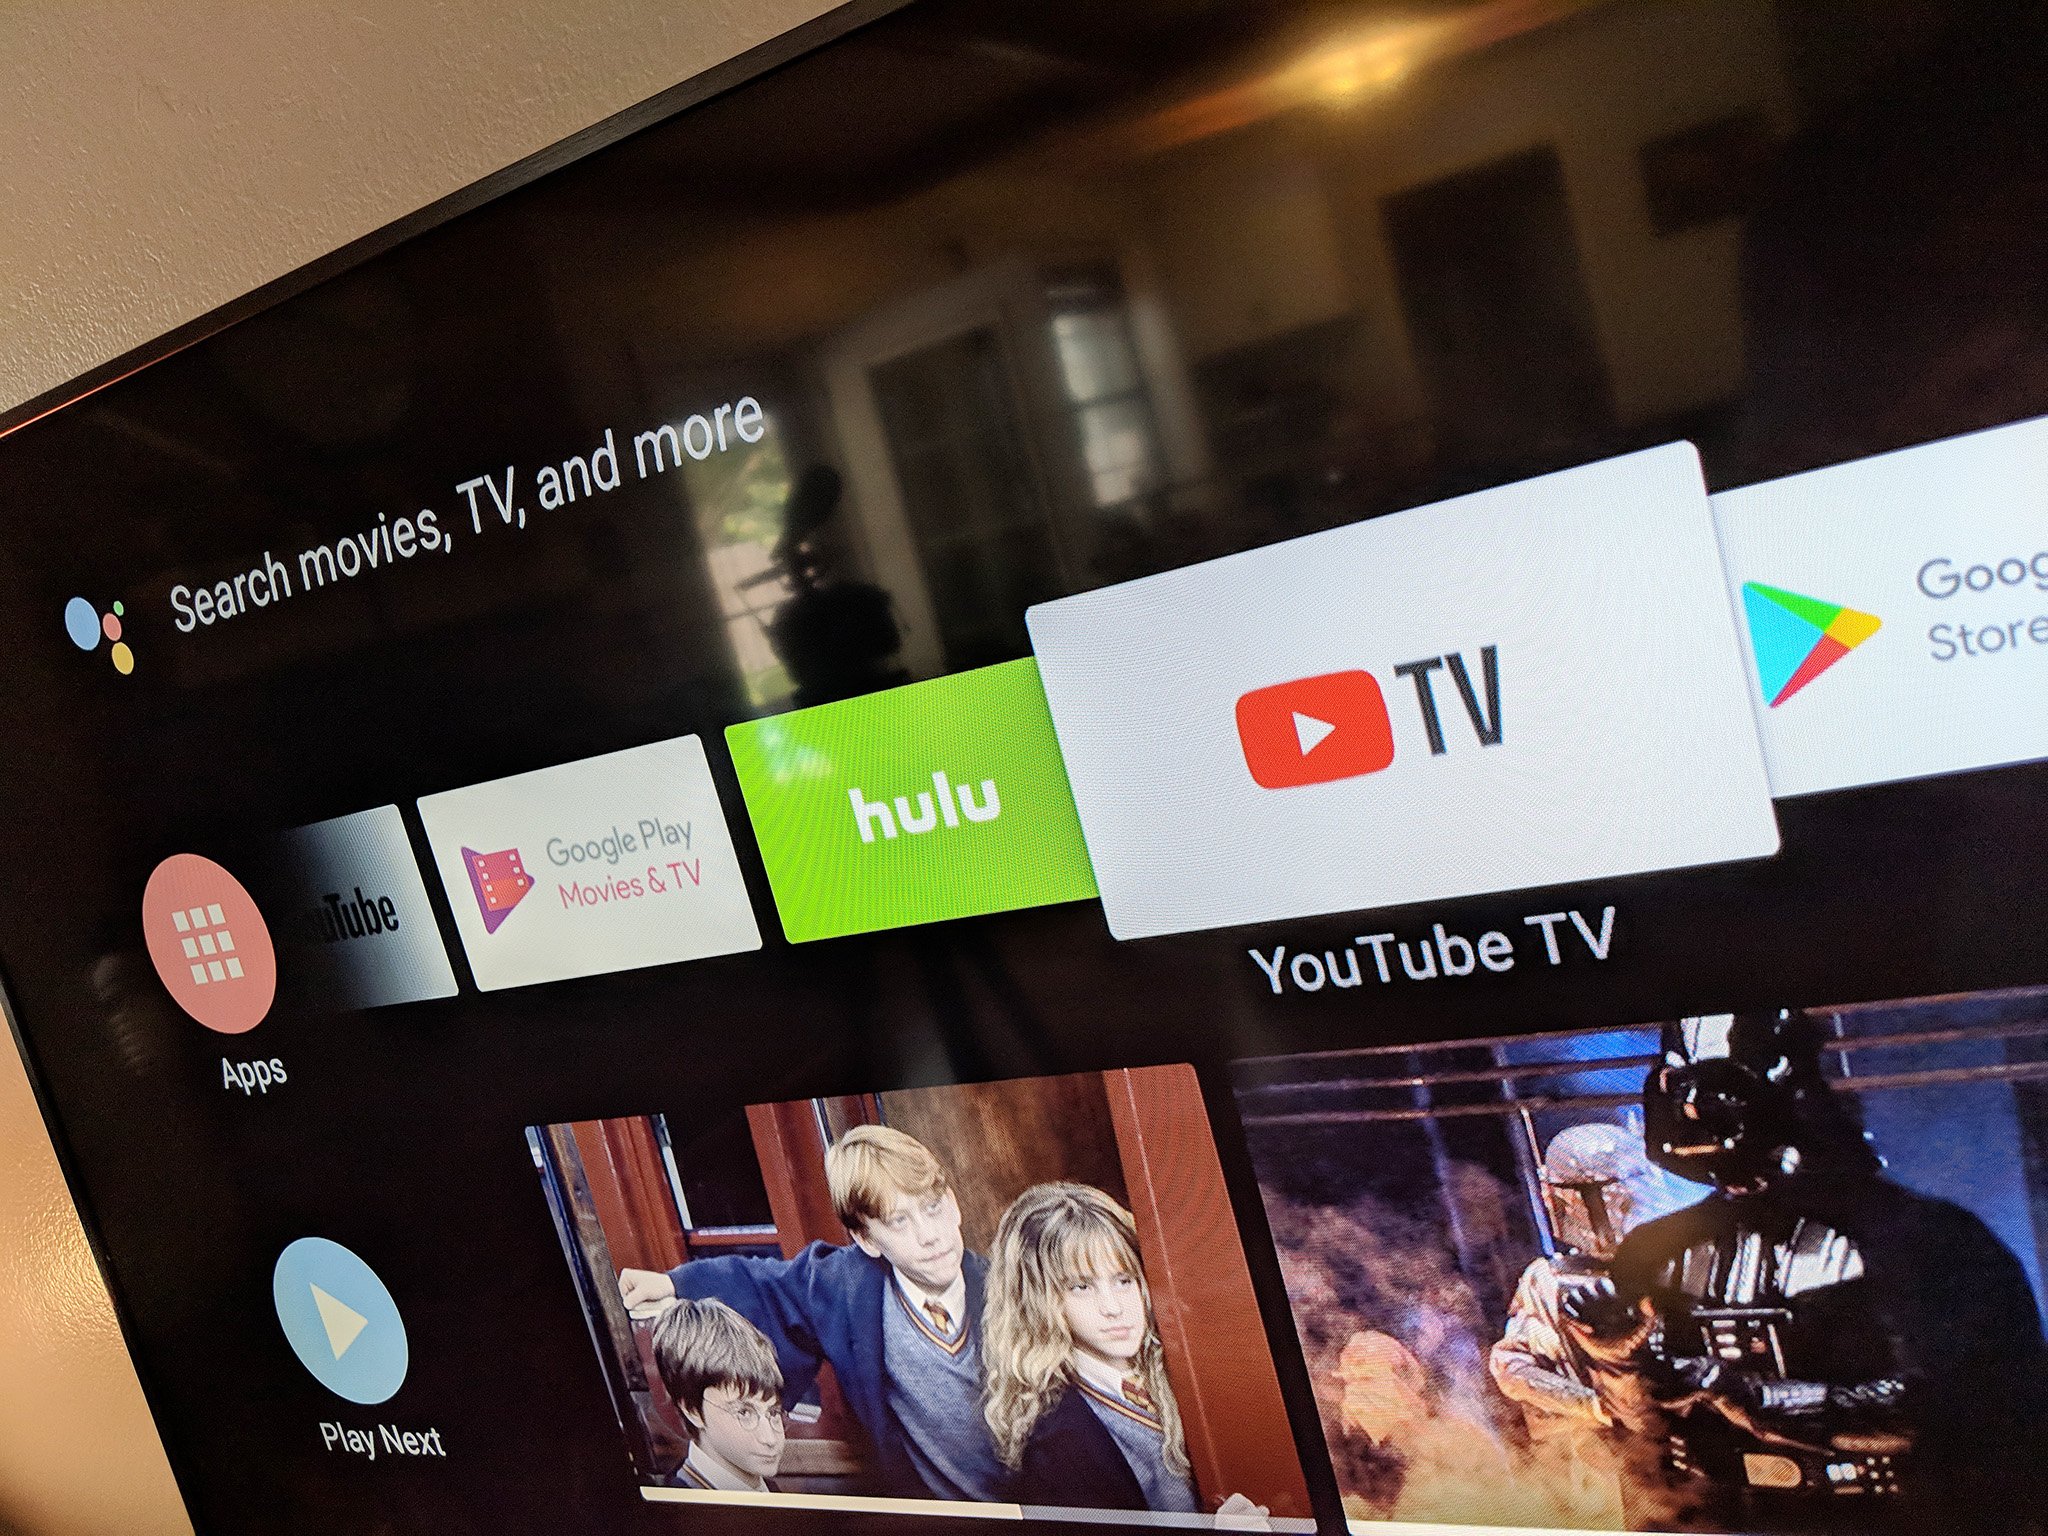 YouTube makes logging into smart TVs less of a headache